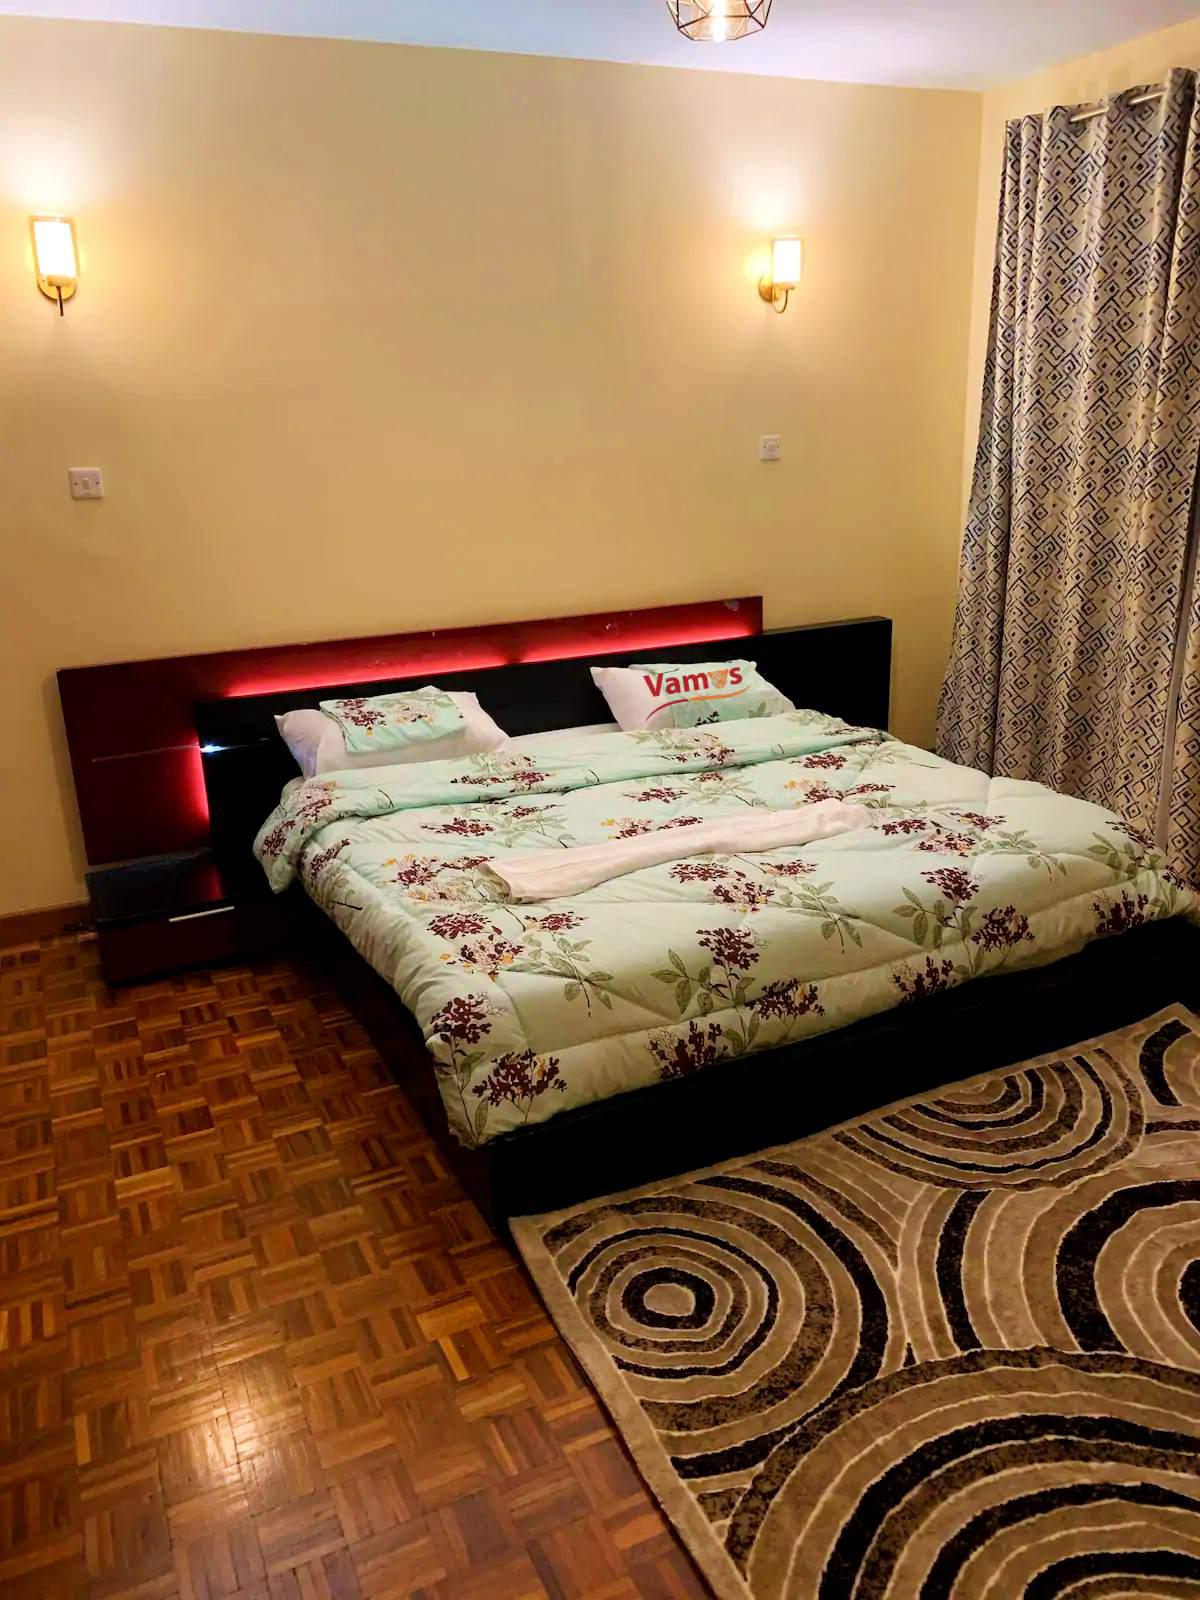 Executive Apartments with Mt. Kenya Views from 1699/pp!